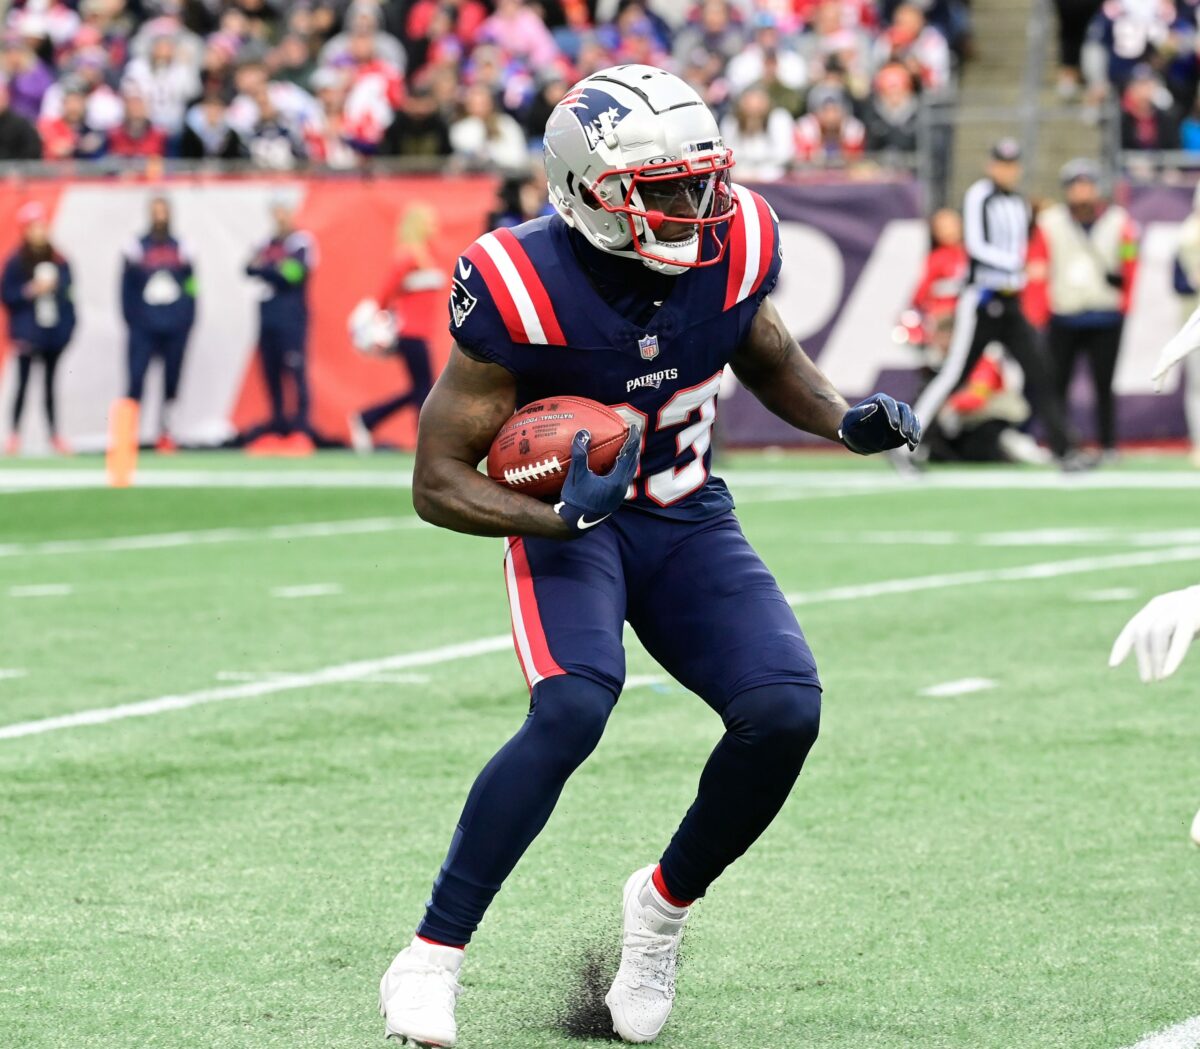 Jalen Reagor opens game with 98-yard kickoff return TD for Patriots